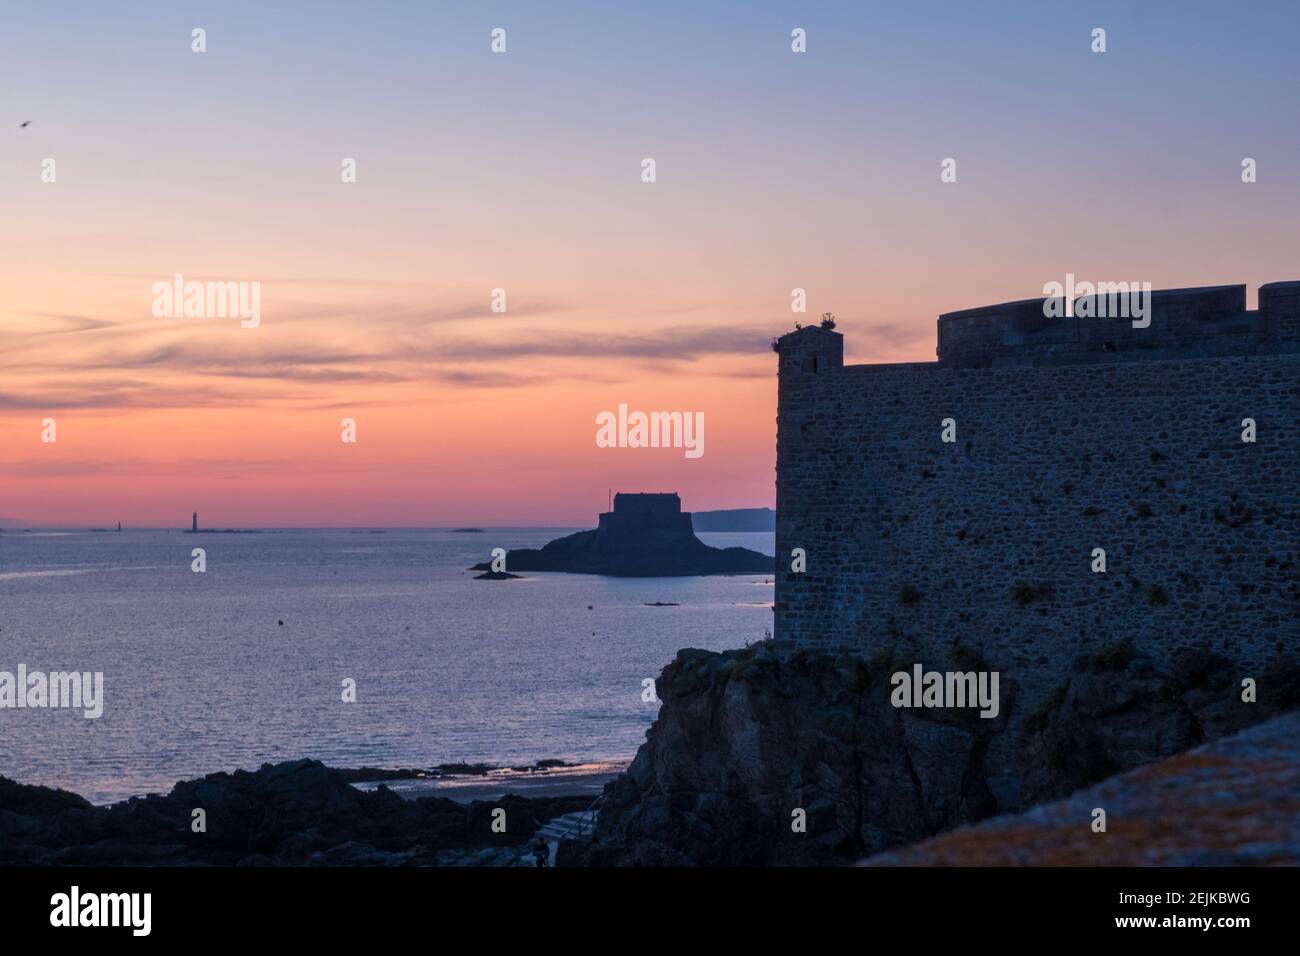 Saint-Malo, France - August 25, 2019: View at sunset from the Historic wall of Intra Muros in Saint-Malo, Brittany Coast on the English Channel Stock Photo